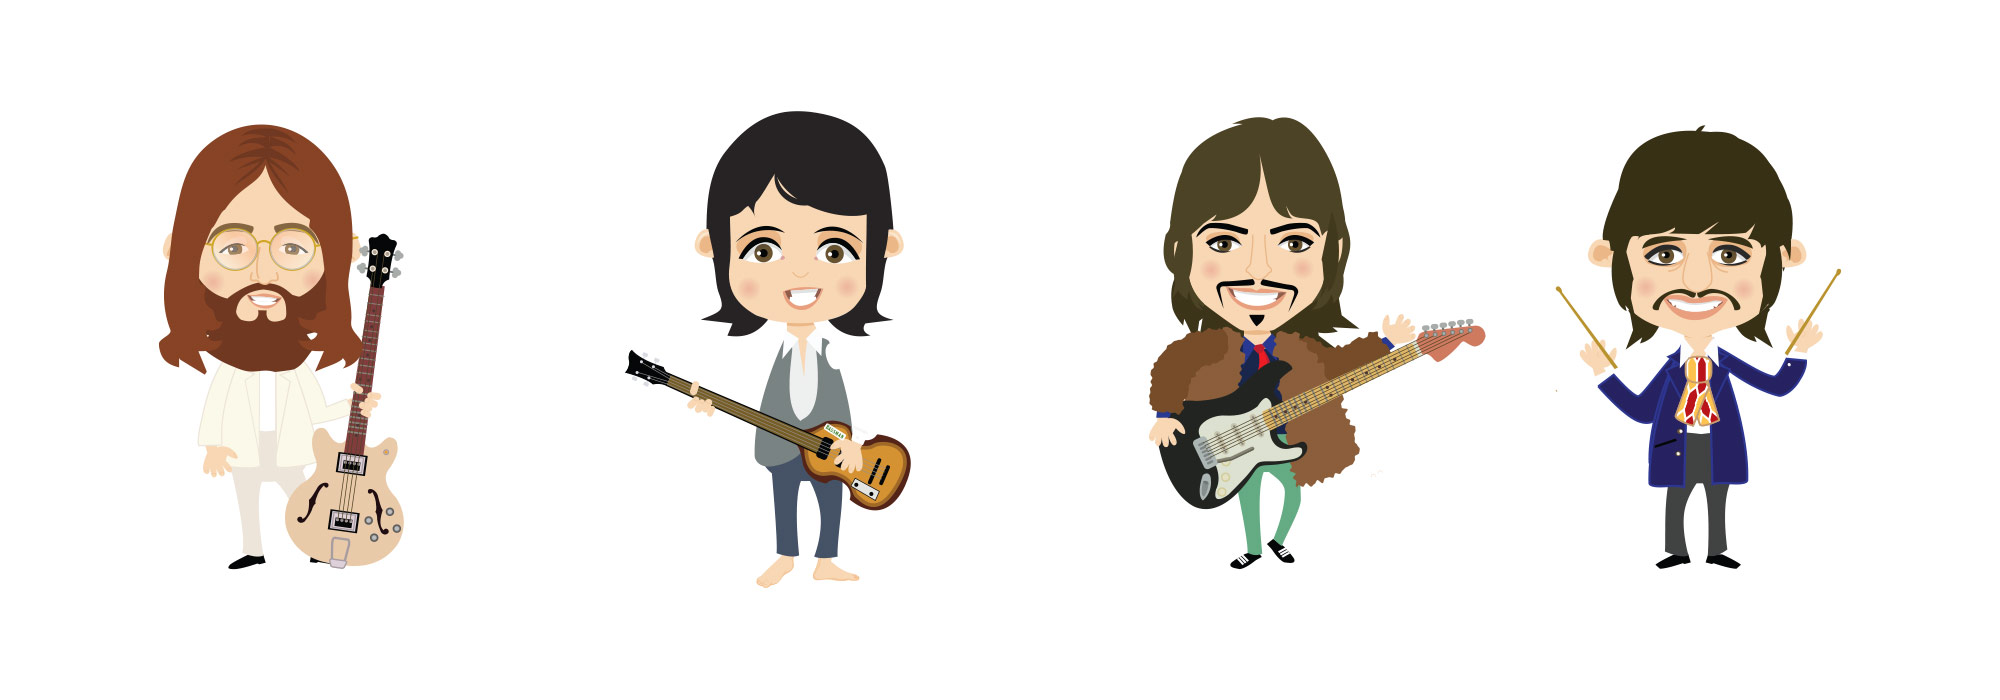 Illustration of the Beatles aimed at children